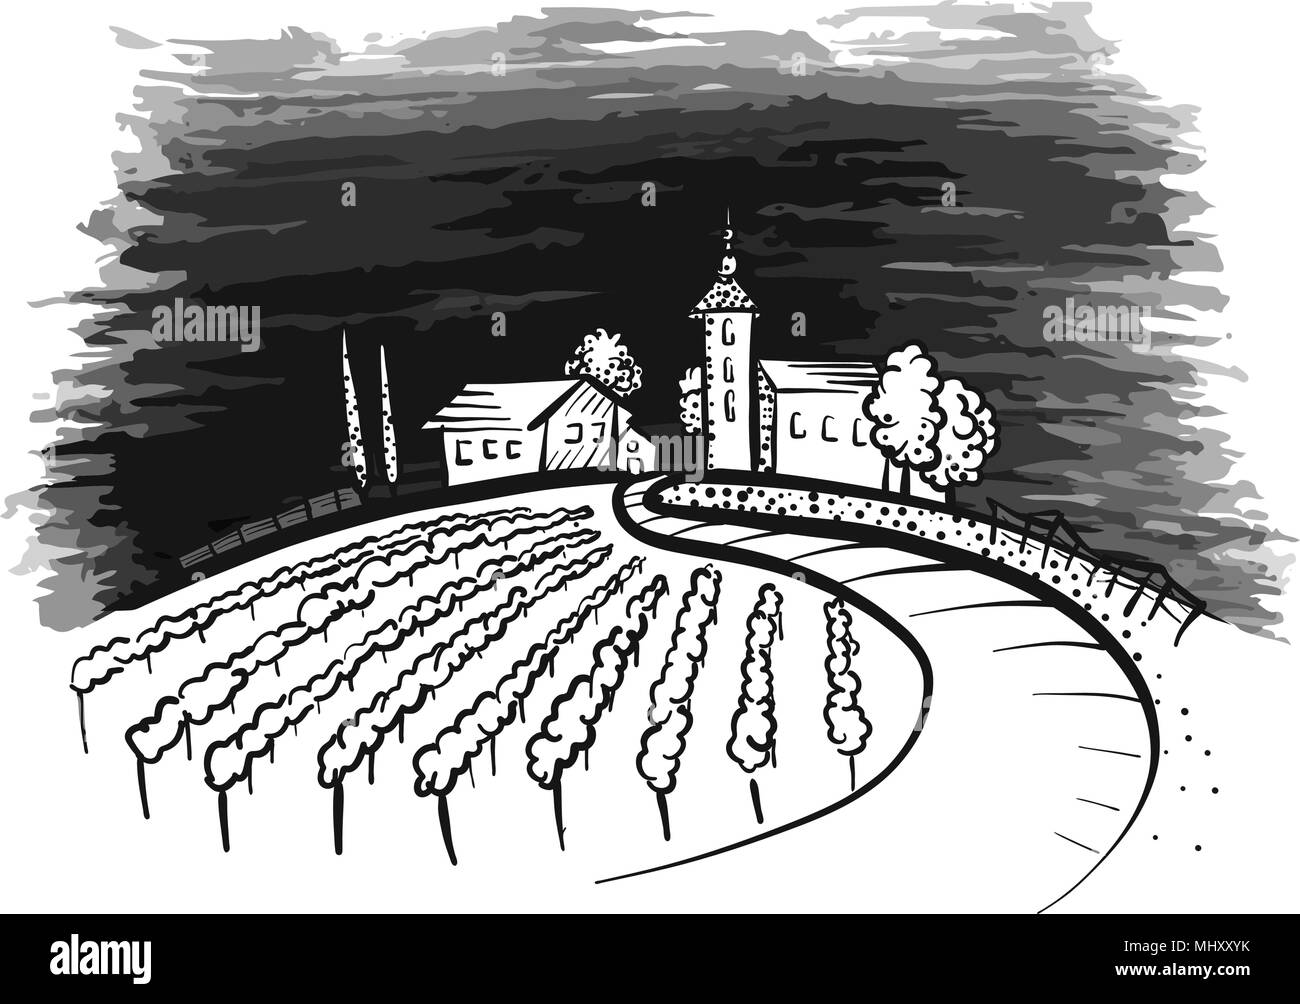 Vineyard and Houses on Hill with path. Handmade vector drawing with black painted Background. Stock Vector